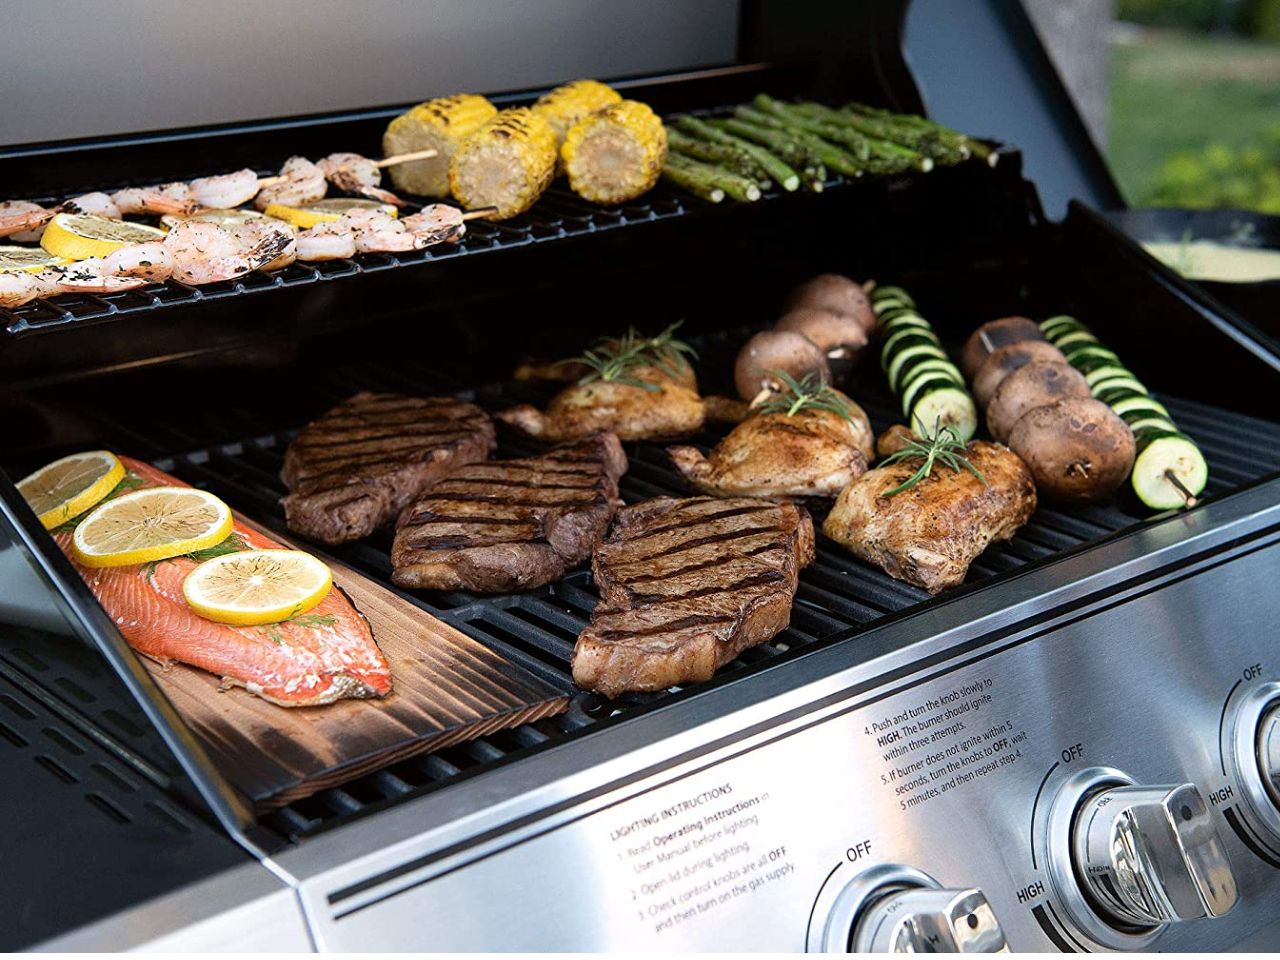 Expert Grill 5-burner gas grill cooking meats and side dishes.